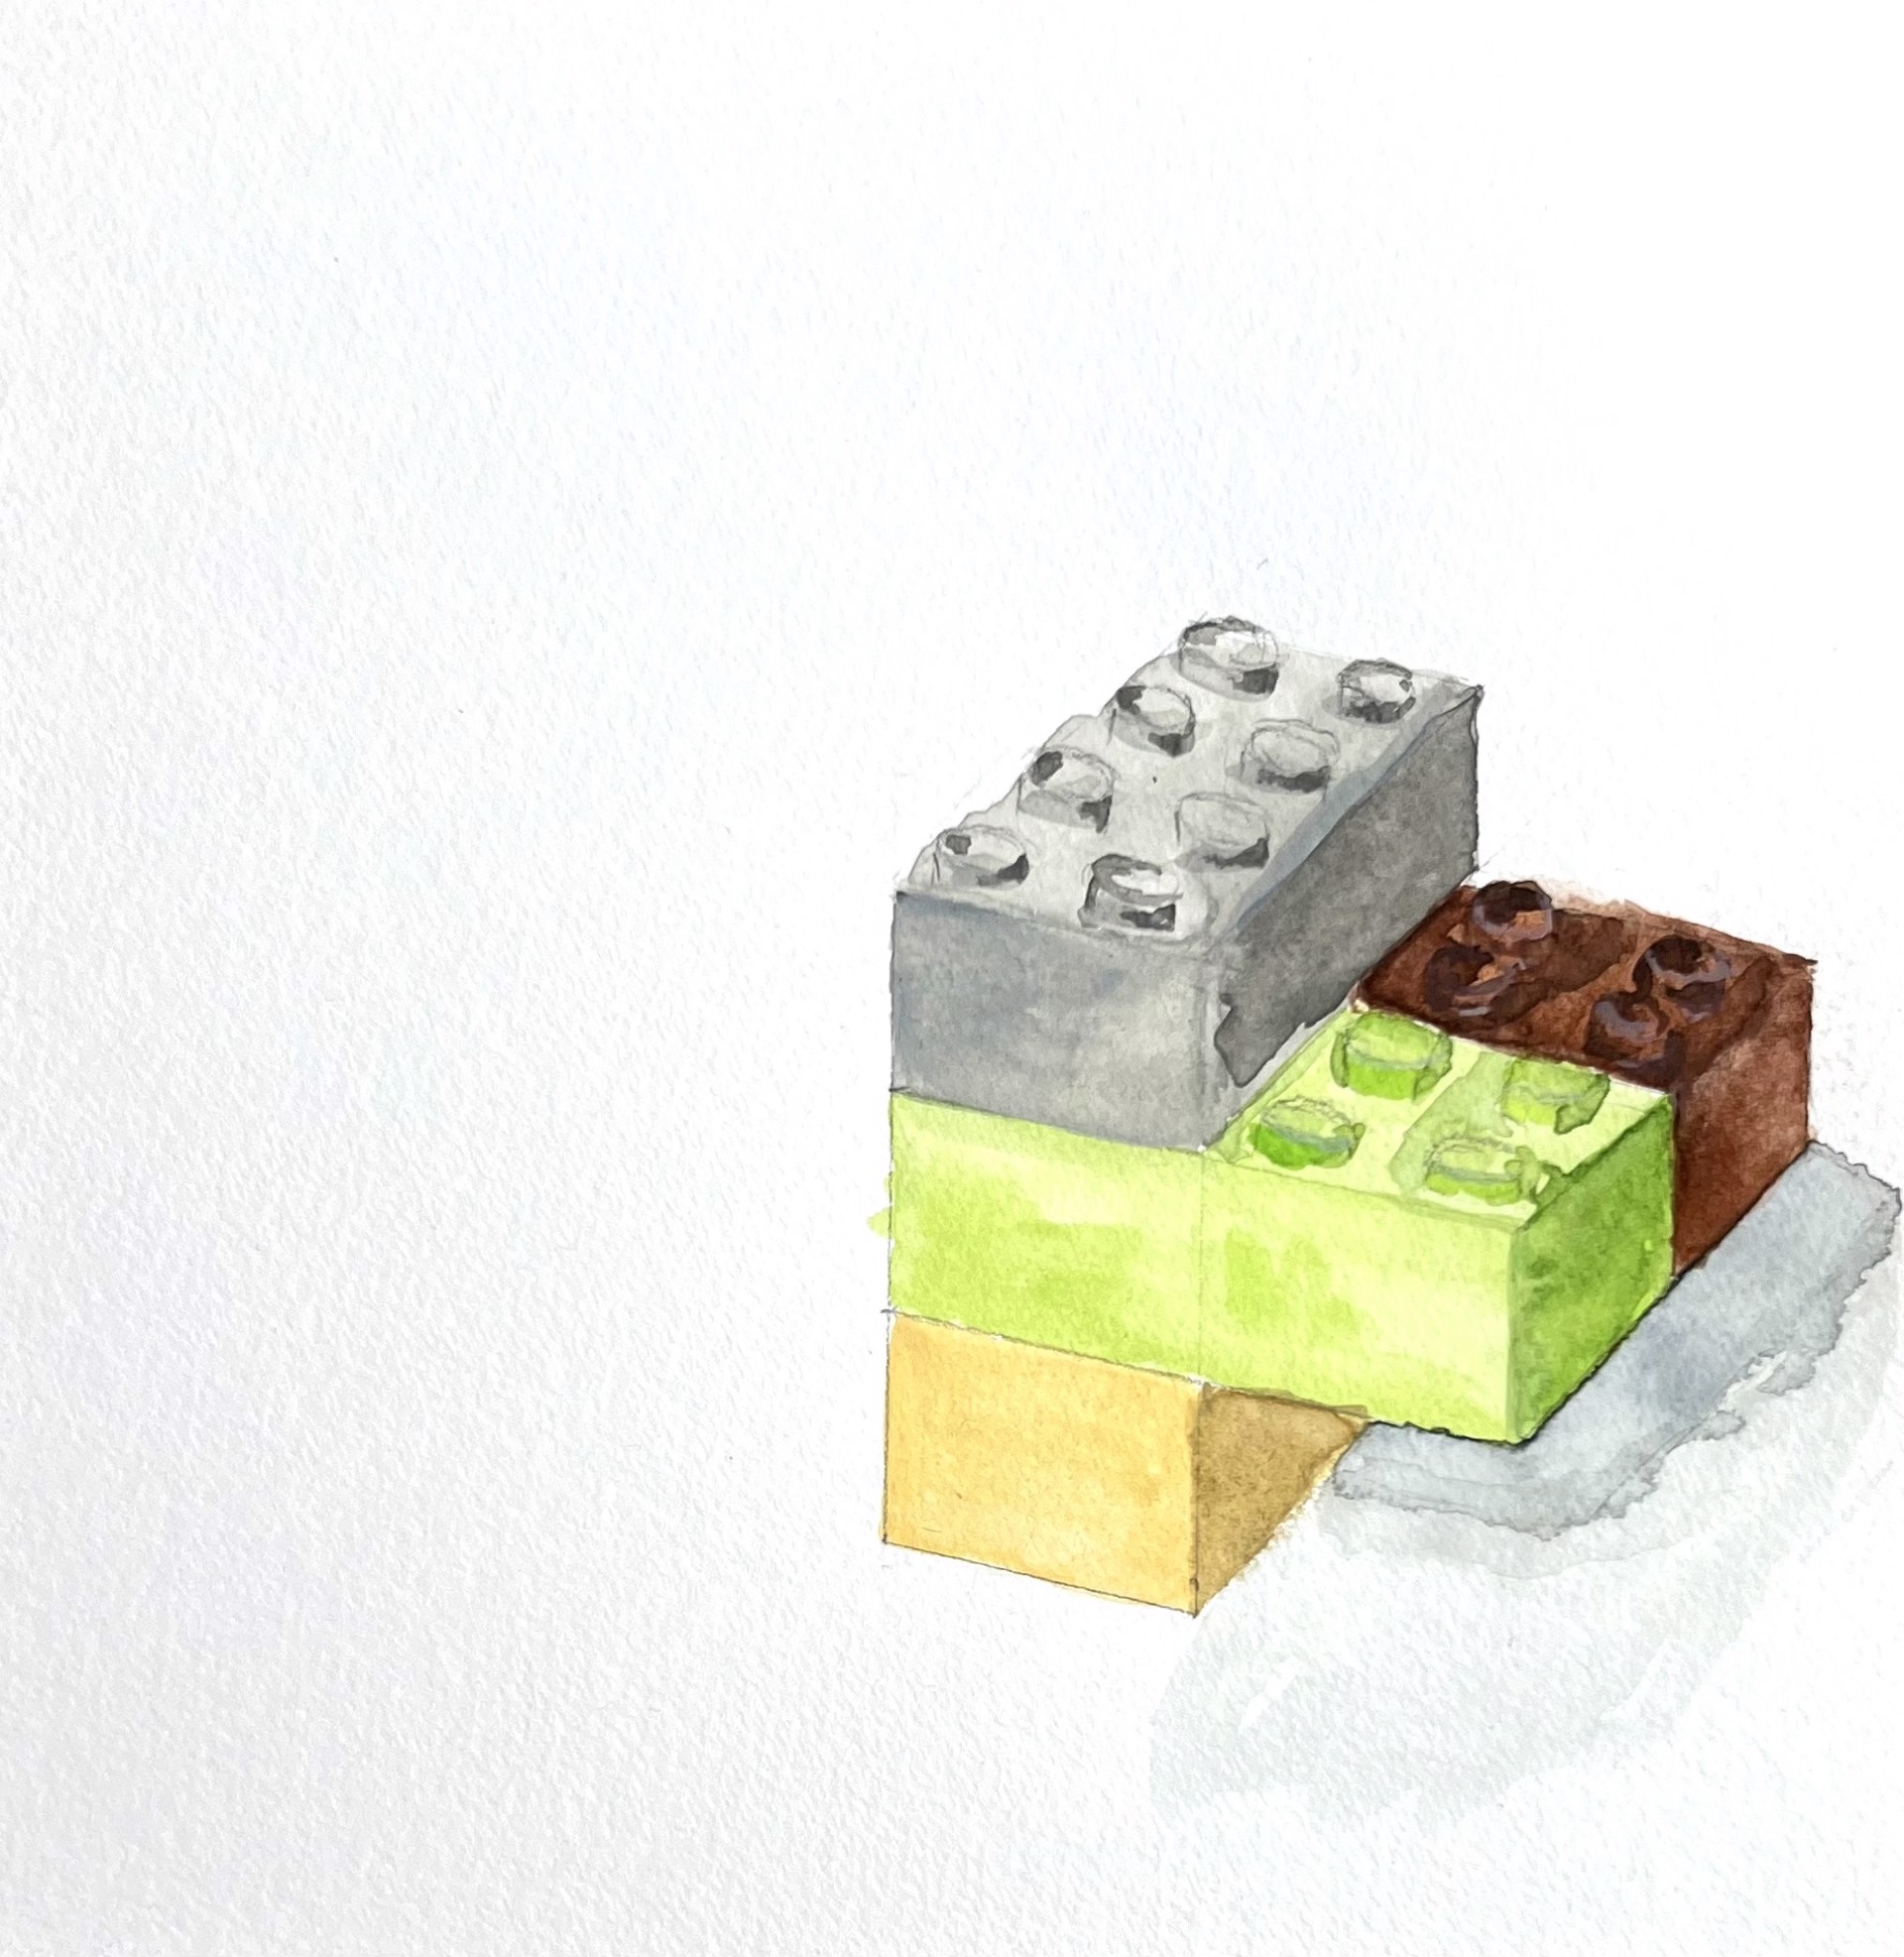 LEGO Study #13 by Kate Fisher